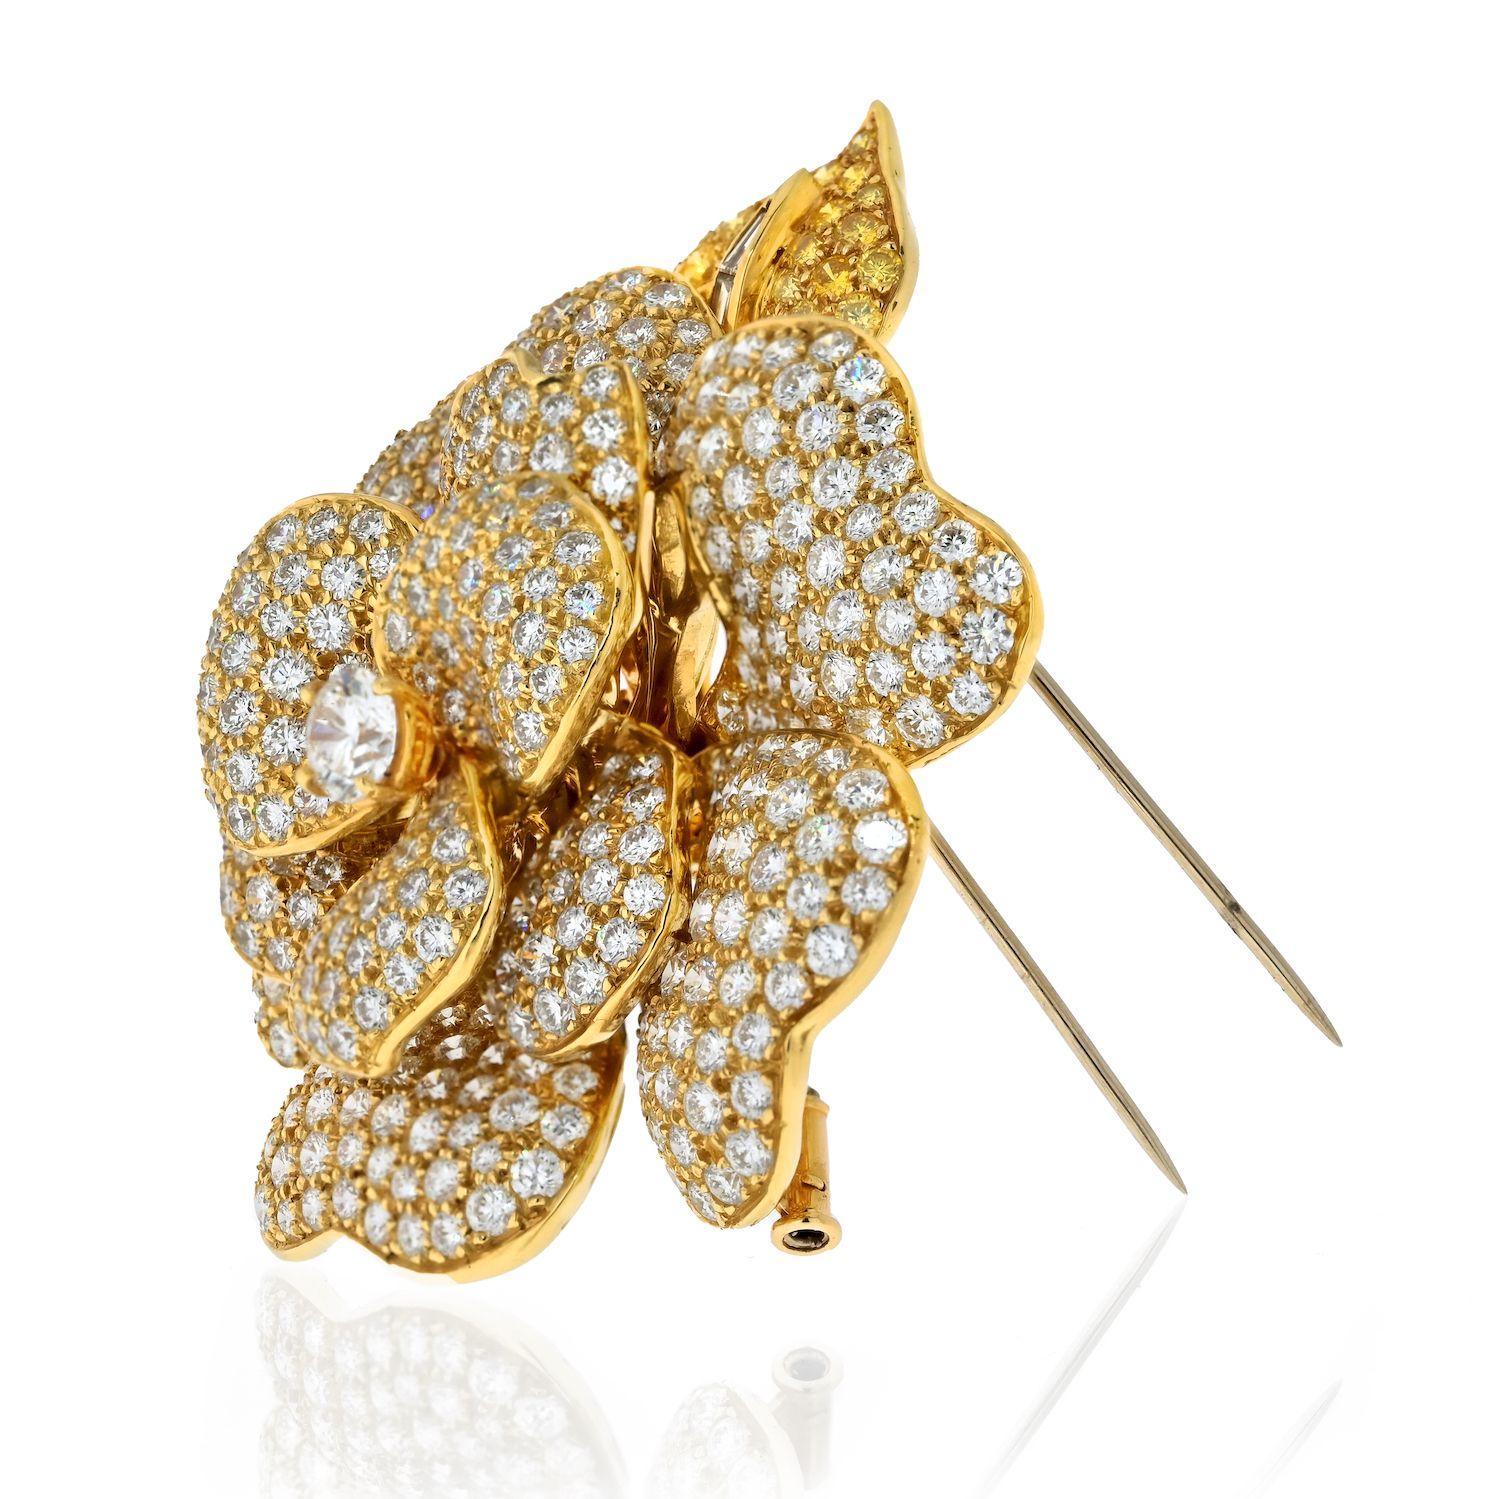 Behold the resplendent beauty of the Estate Diamond Rose Brooch, a true masterpiece that melds nature's grace with the brilliance of diamonds. Crafted in the finest 18K yellow gold, this brooch takes the form of a delicate rose, capturing the